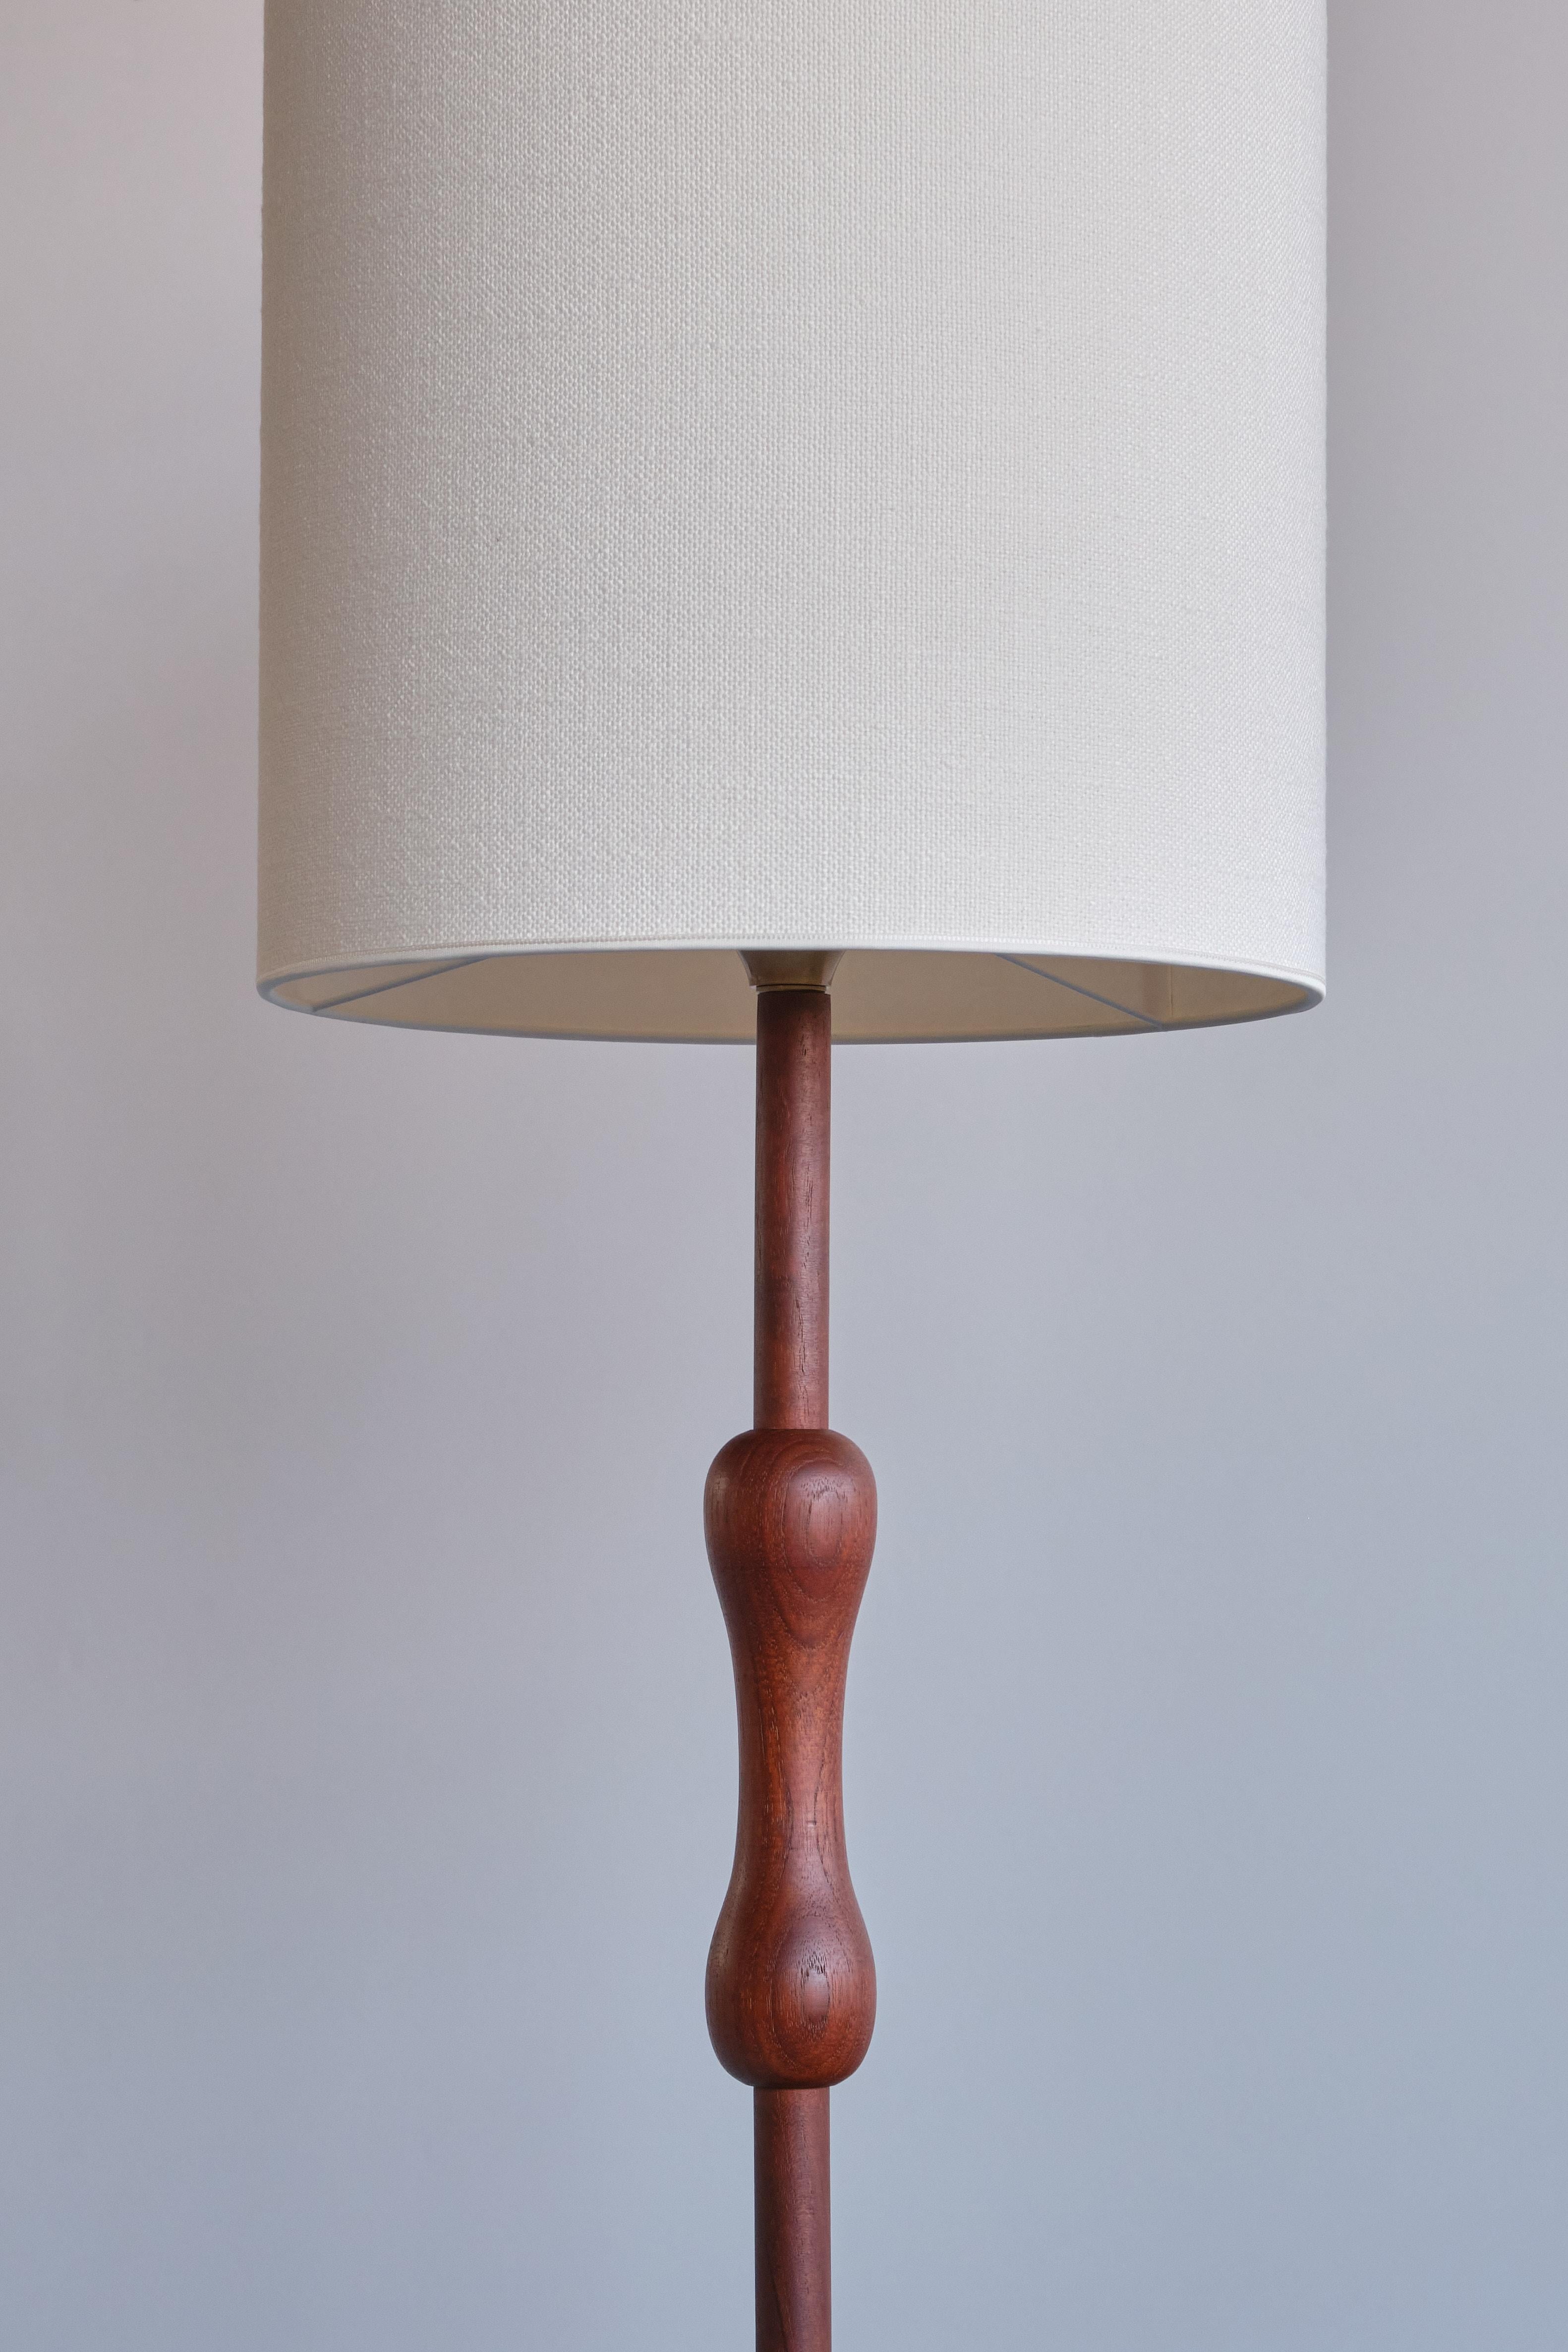 Fabric Organic Modern Floor / Table Lamp in Solid Teak Wood, Sweden, 1950s For Sale